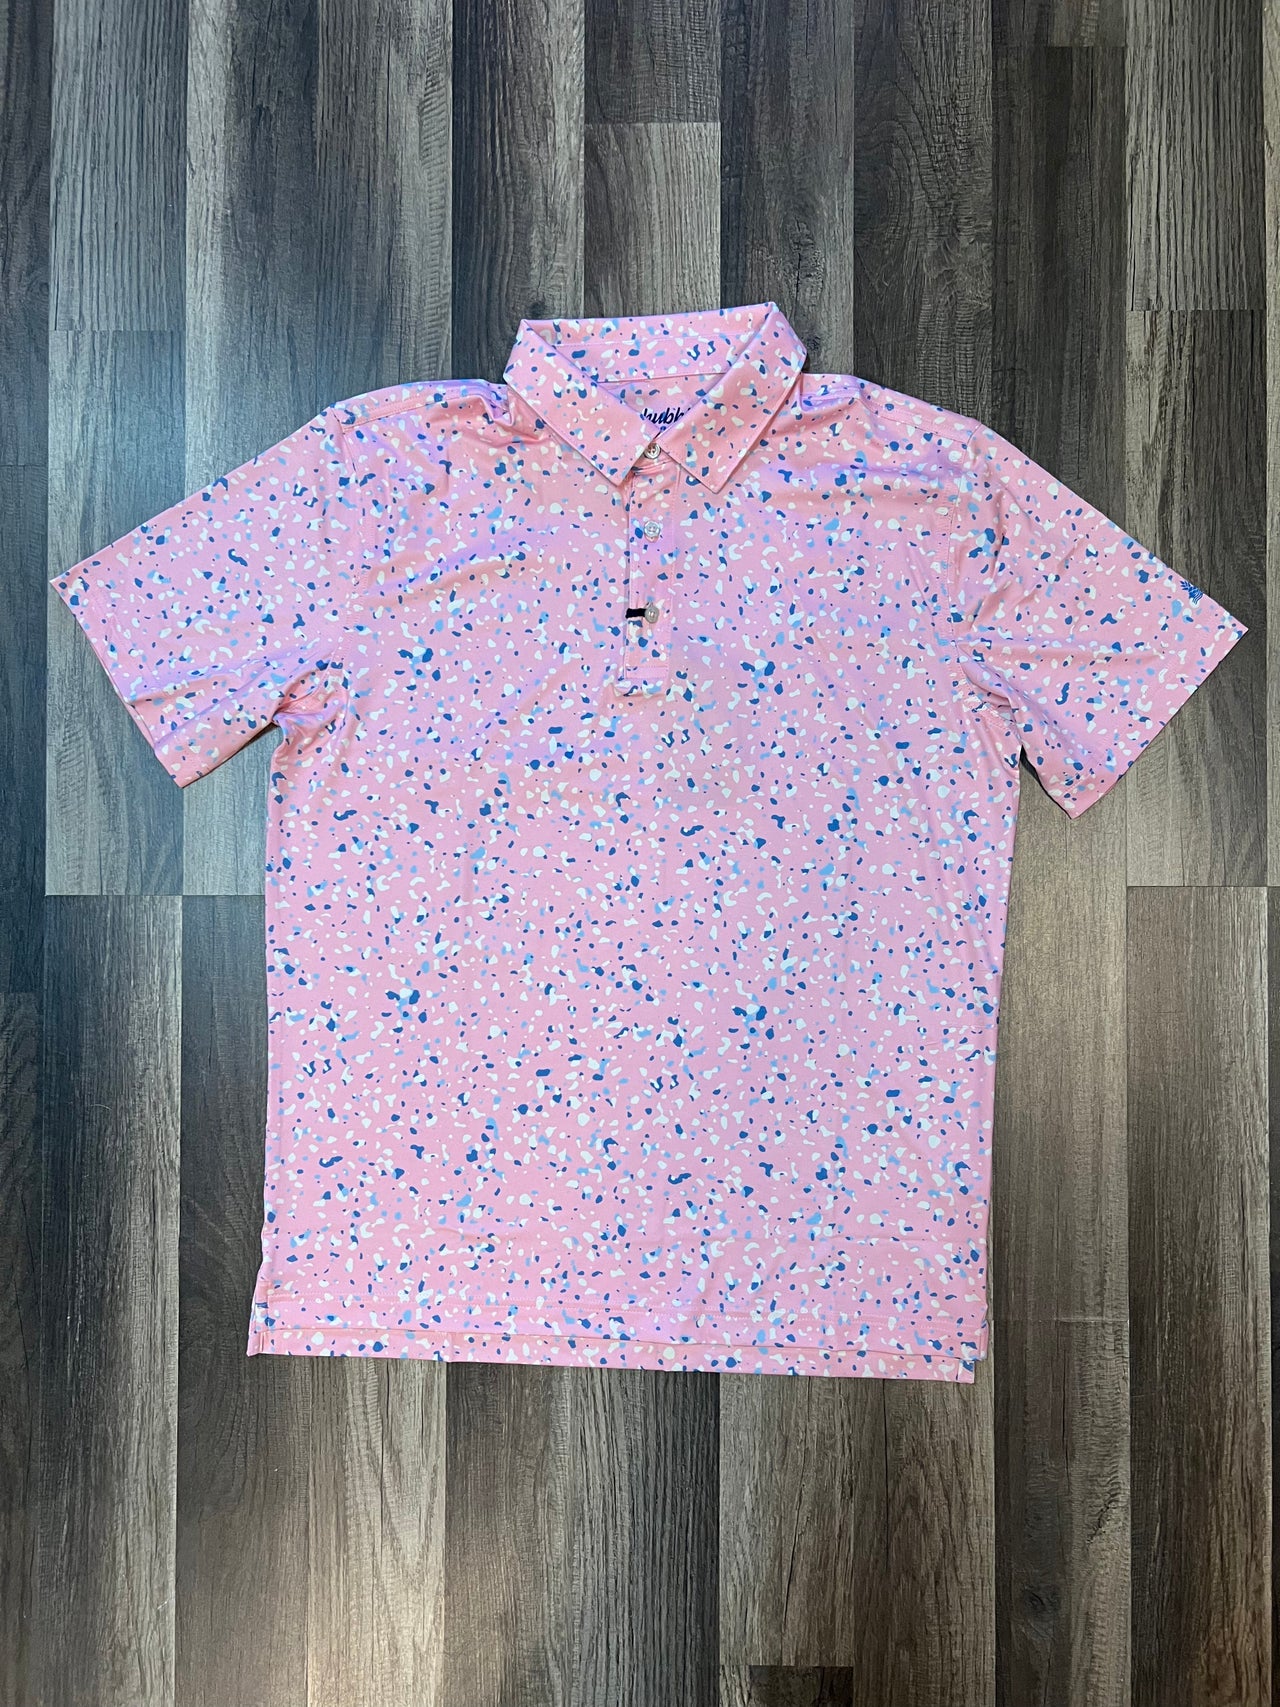  "Chubbies Performance Polo - The Funfetti in Pink with Blue Confetti: A vibrant and energetic polo shirt featuring a playful blend of pink and blue confetti patterns. Crafted from moisture-wicking fabric for ultimate comfort and performance. Perfect for any activity, this tailored-fit polo combines style and functionality with a three-button placket and ribbed collar."